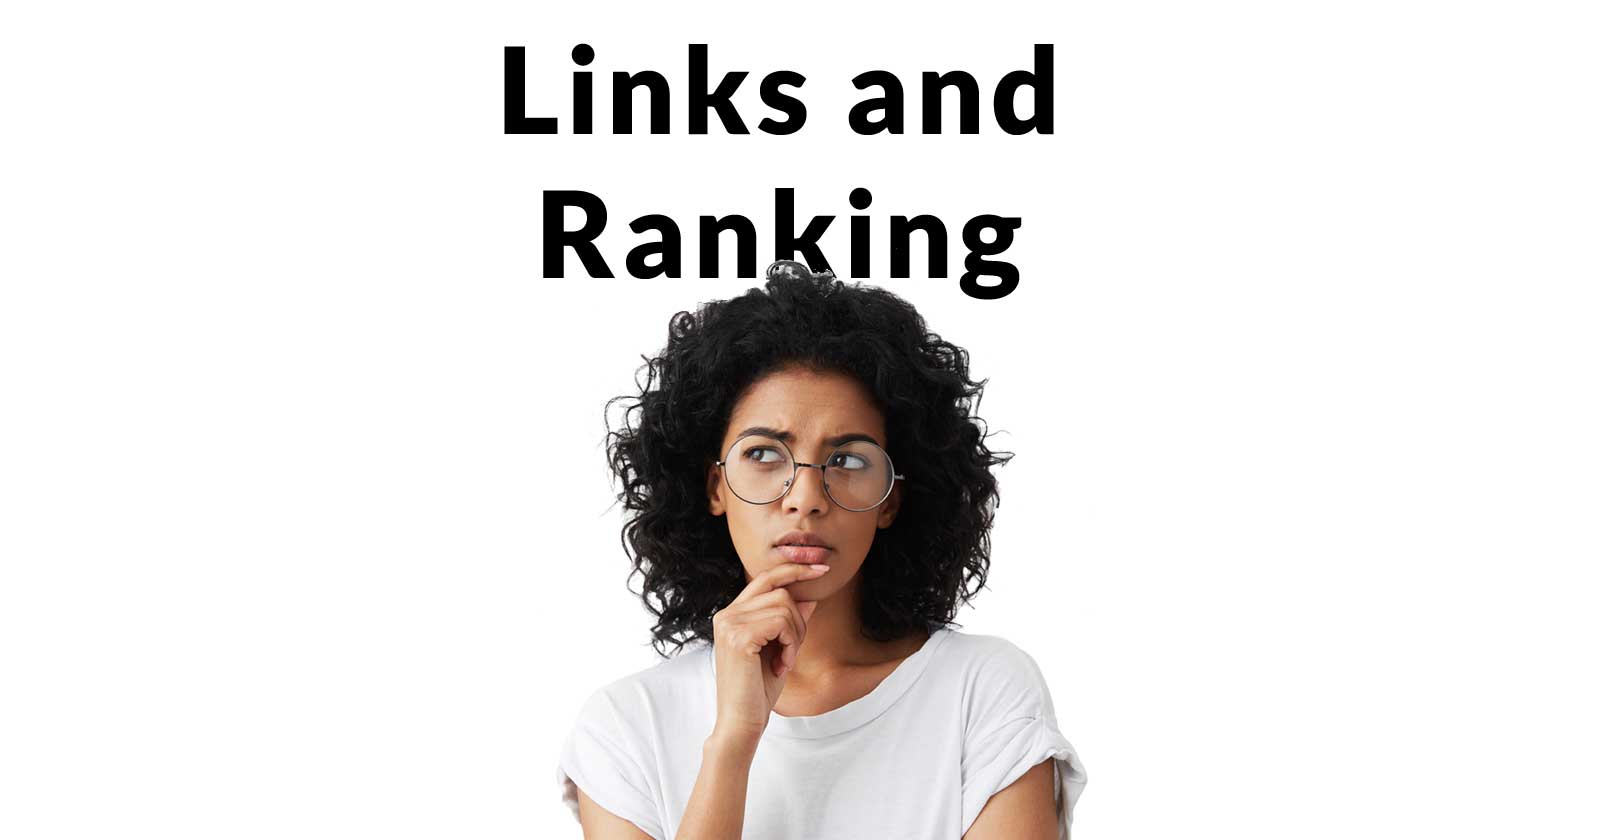 Image of a woman thinking, a metaphor for thinking about the relationship of links and ranking in Google's search results